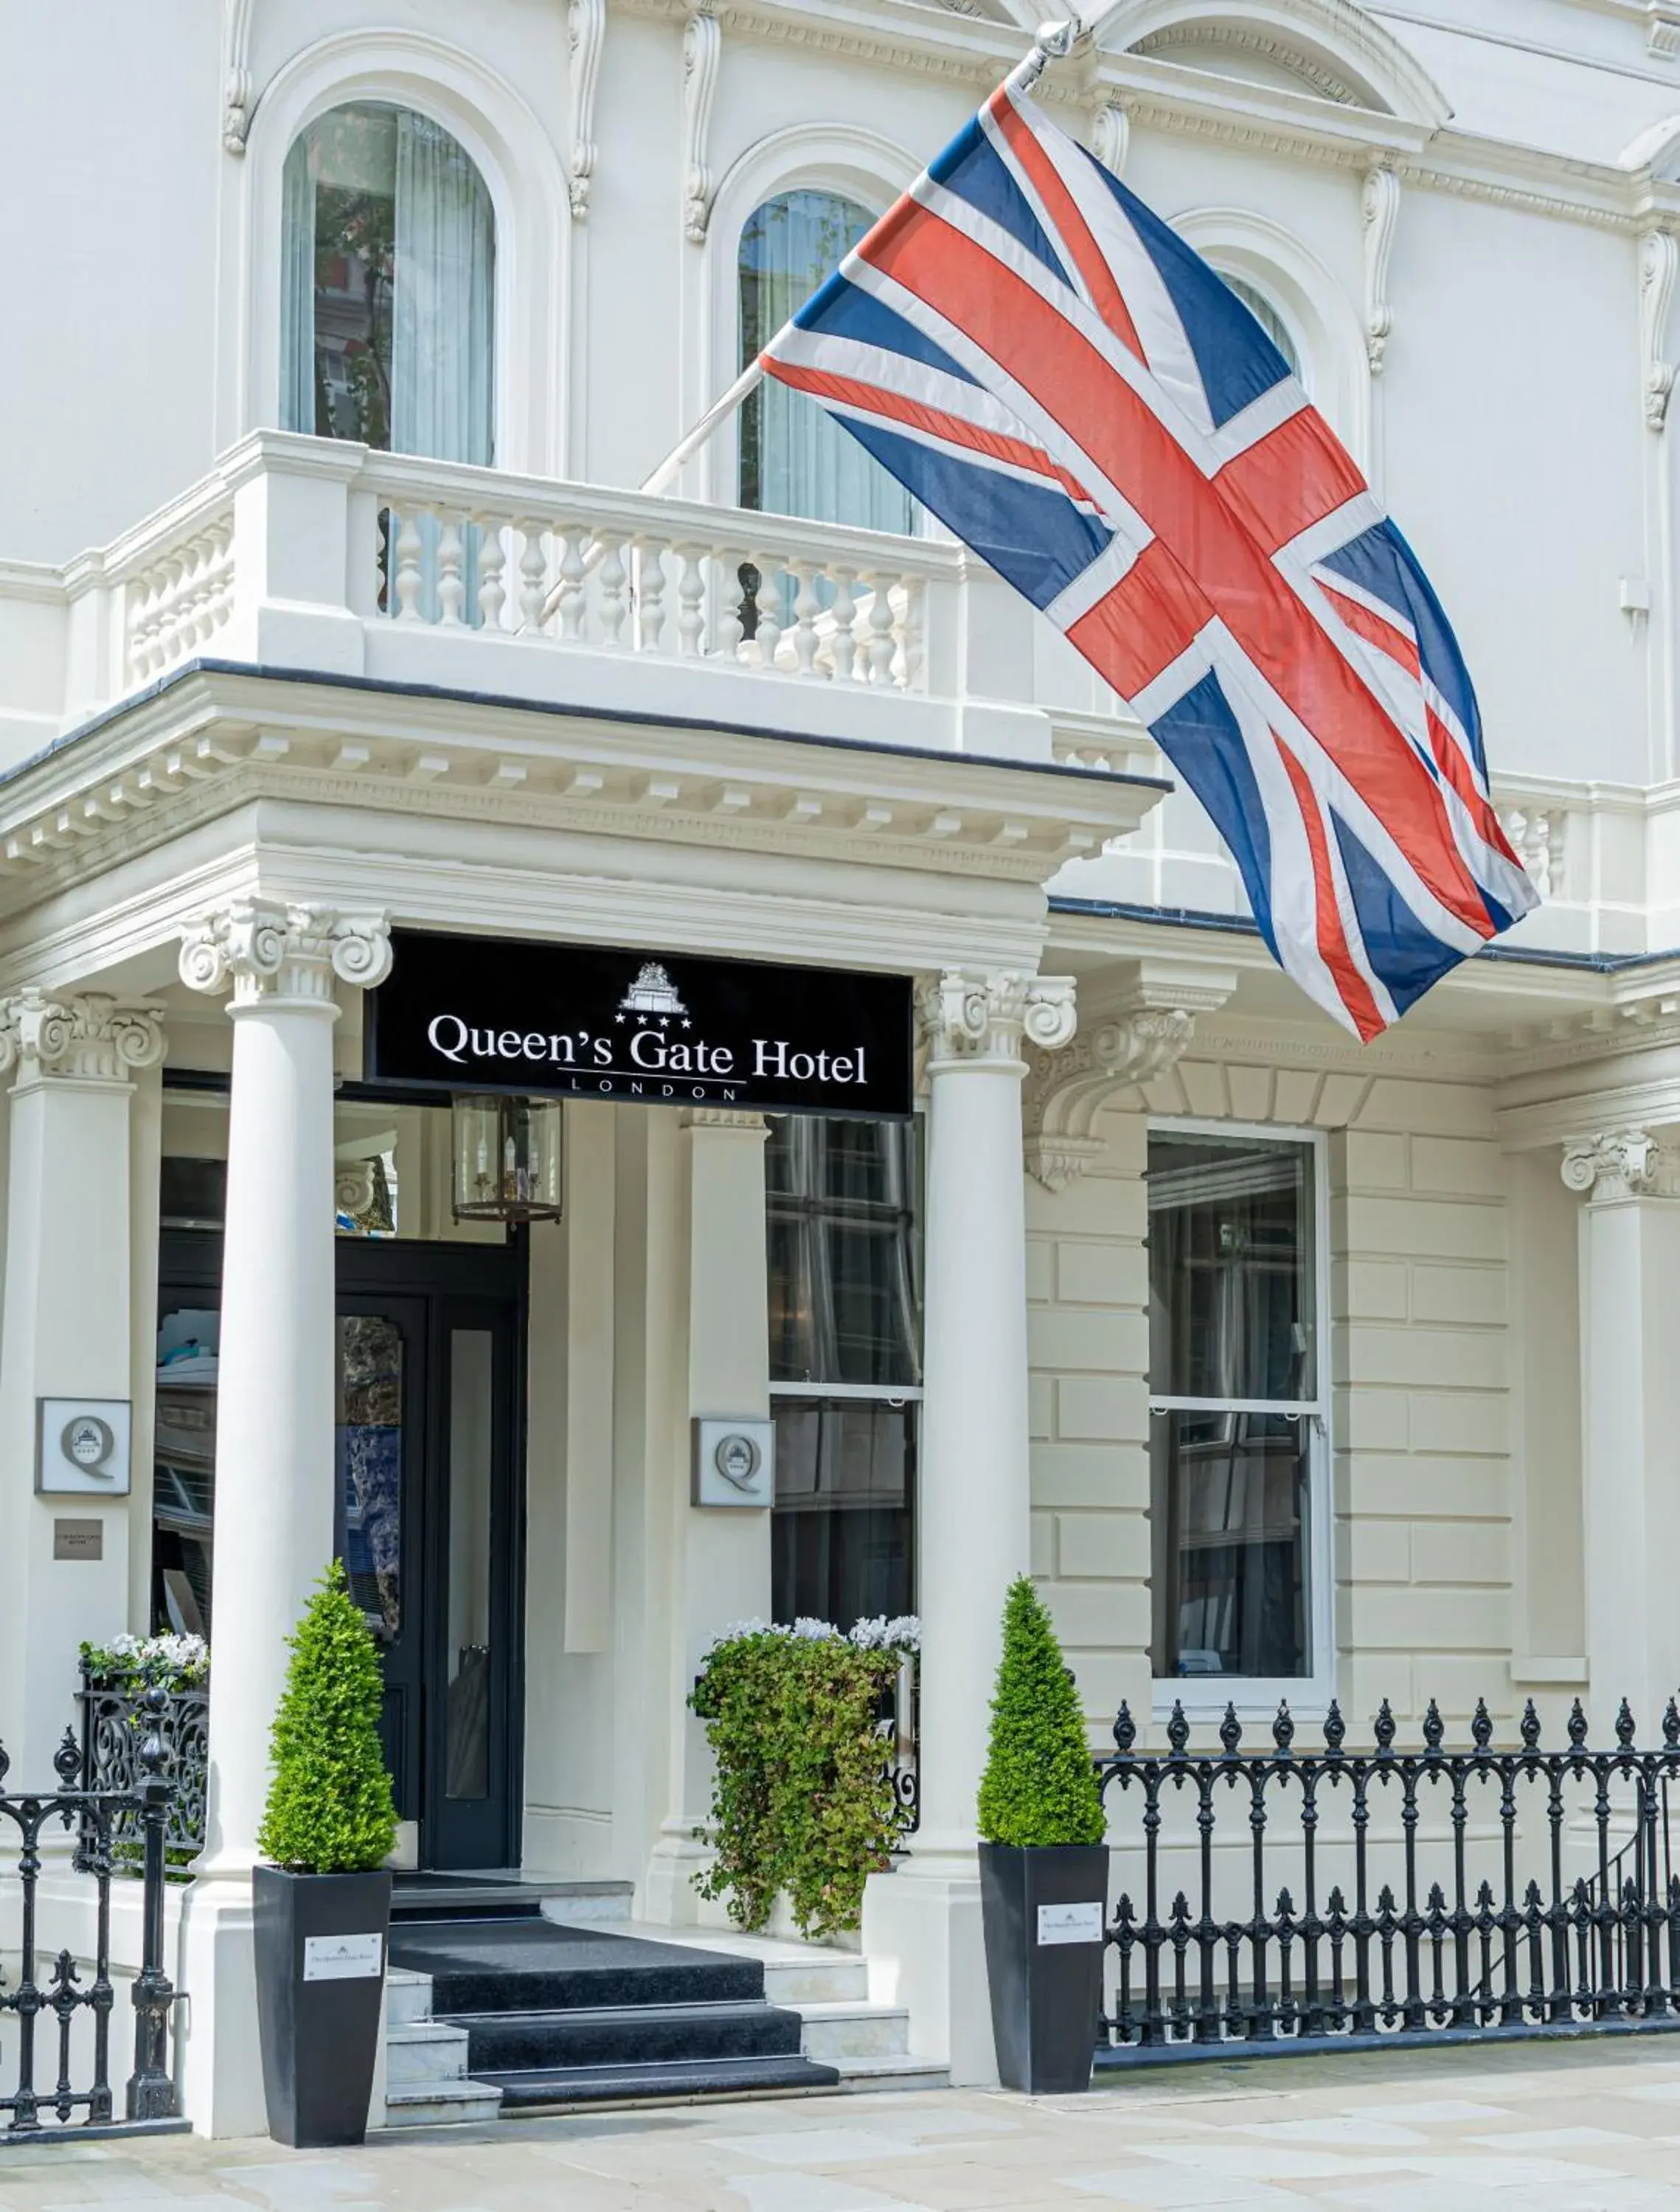 Property building in The Queens Gate Hotel